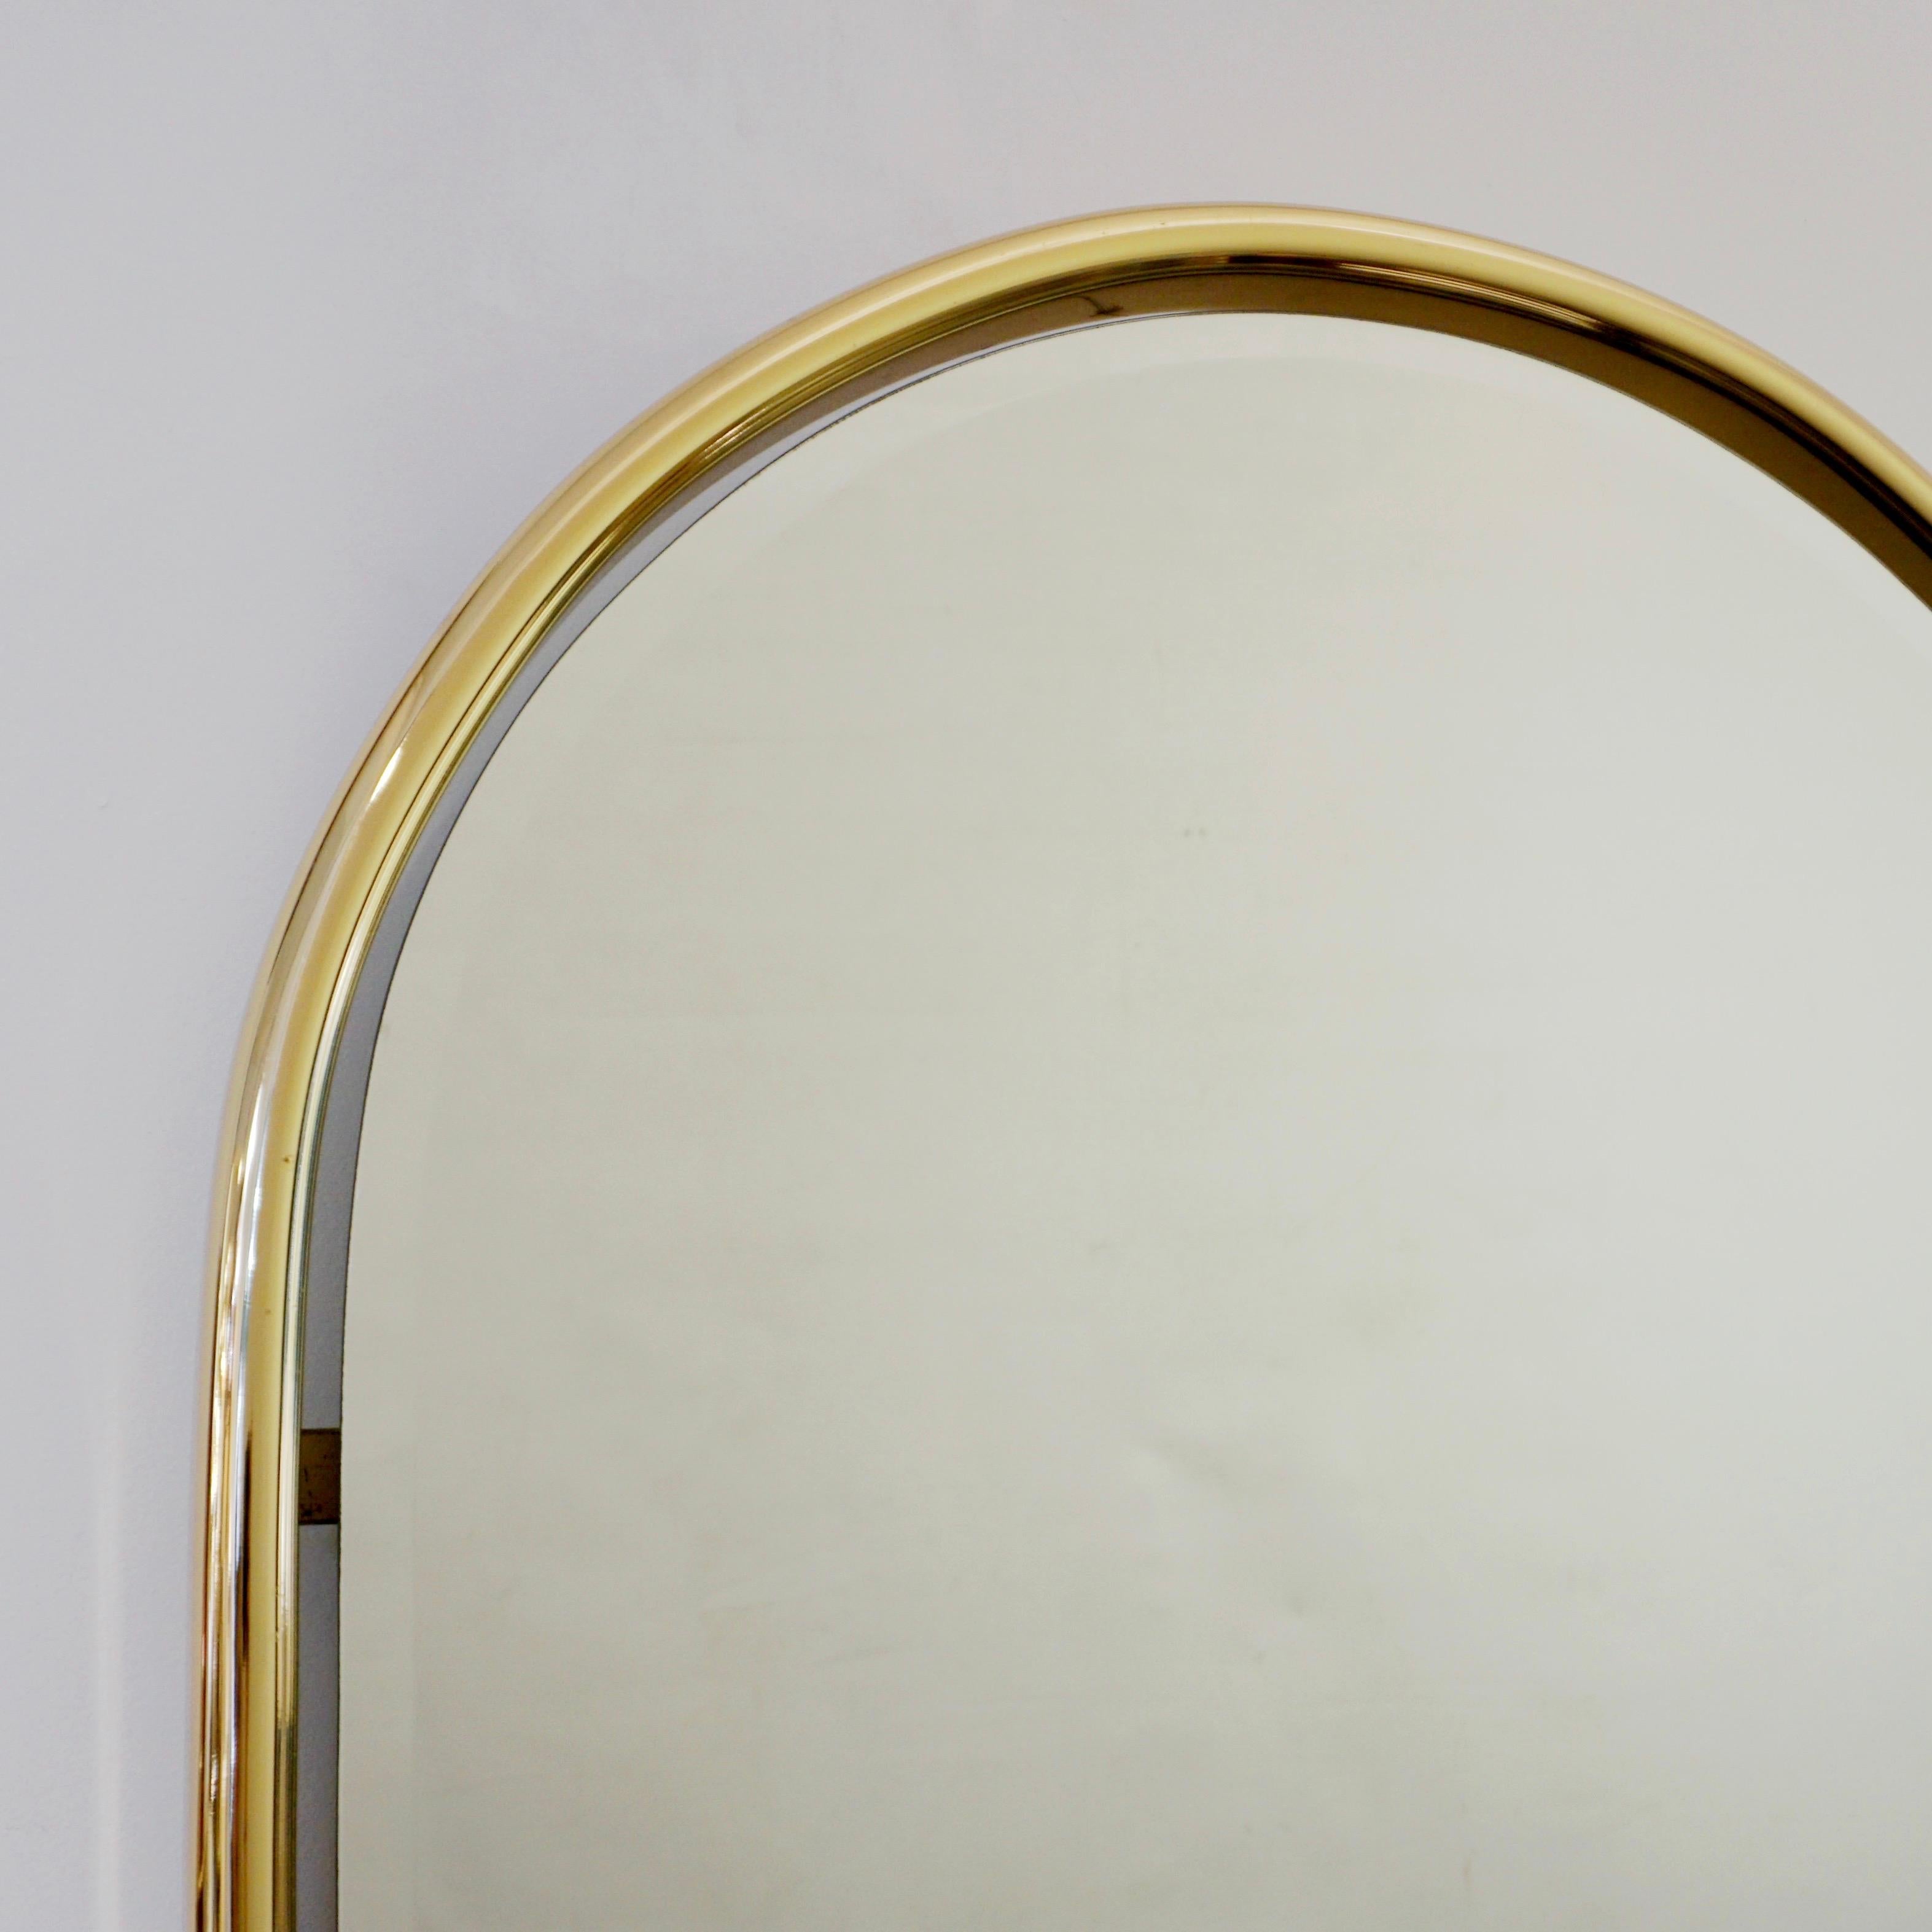 1960s Italian Minimalist Brass Full Floating Mirror with Round Arched Top Frame For Sale 6